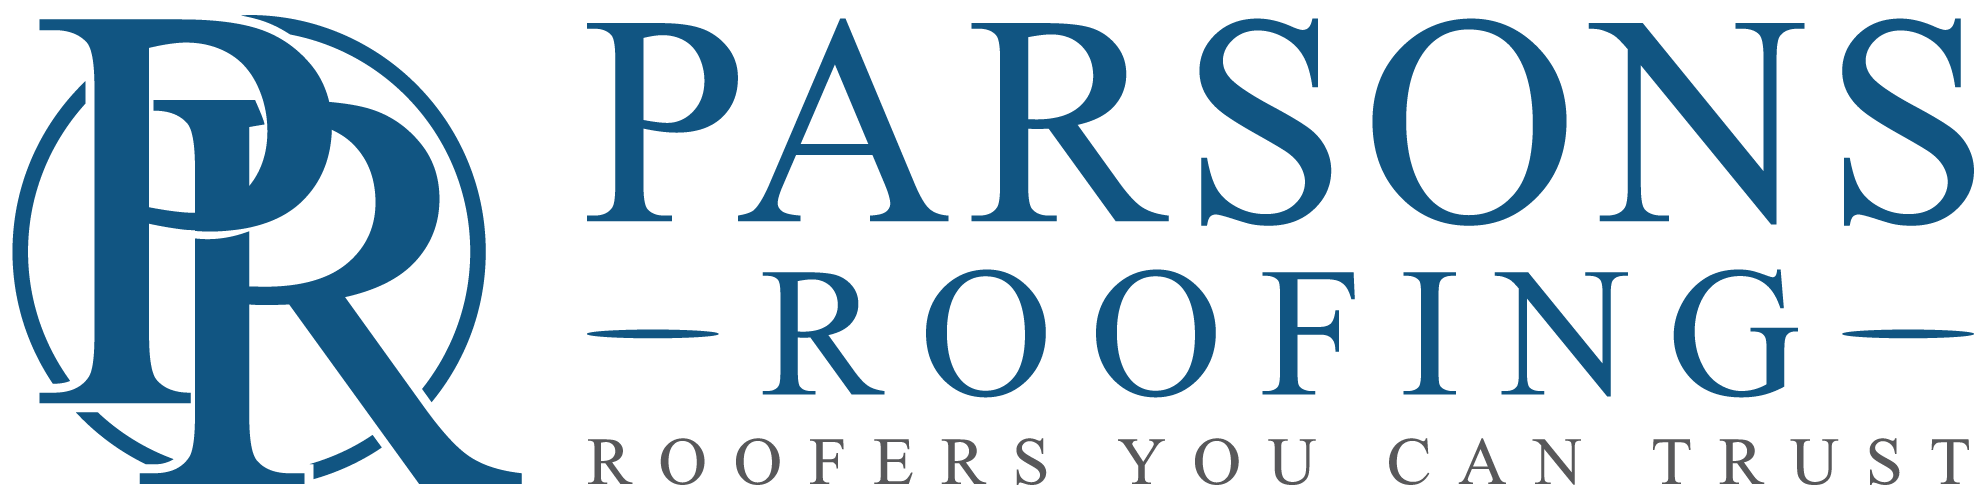 Parsons Roofing Company Logo